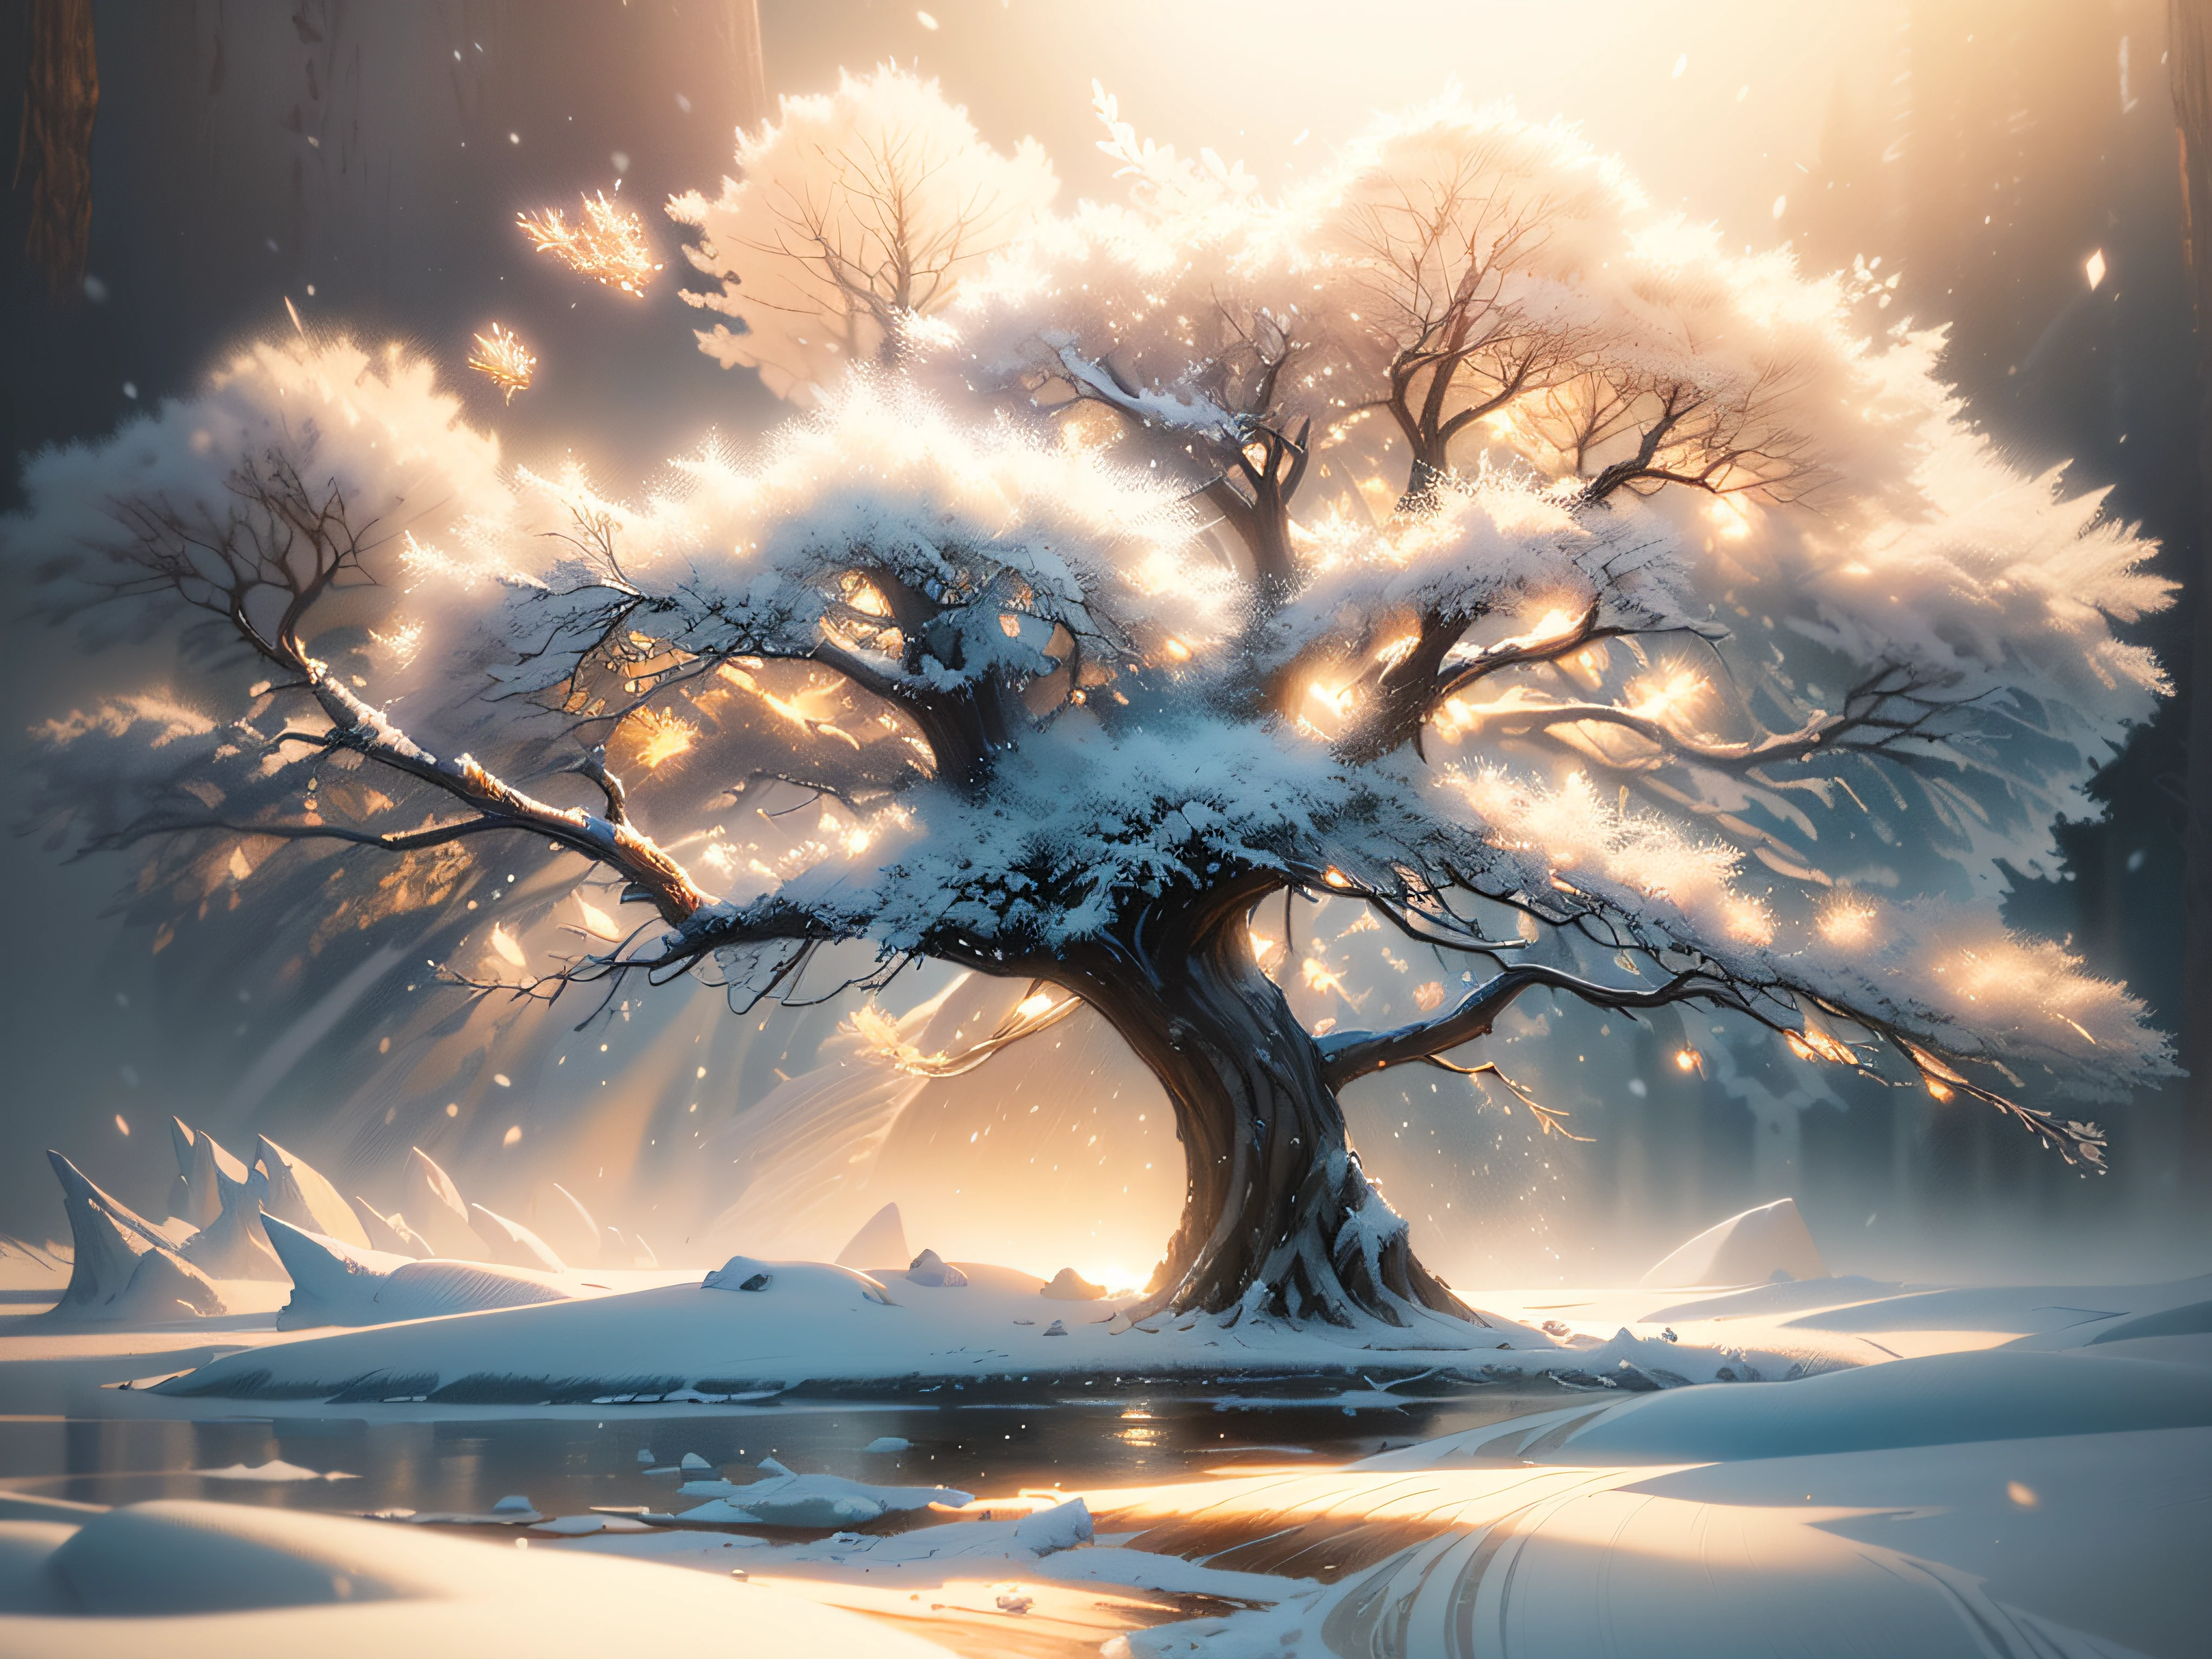 (((​masterpiece))), High quality, Extremely detailed, (Giant wood:1.2), Yggdrasil, (Diamond Dust:1.2), (rhyme:1.2), (Particle:1.2), morning, (ice forest landscape:1.2), Snow, Ice, Winters, Foggy, superfine illustration, (((water painting))), realphoto, line-drawing, Approaching perfection, Insanely detailed, Concept art, epicd, Cinematic